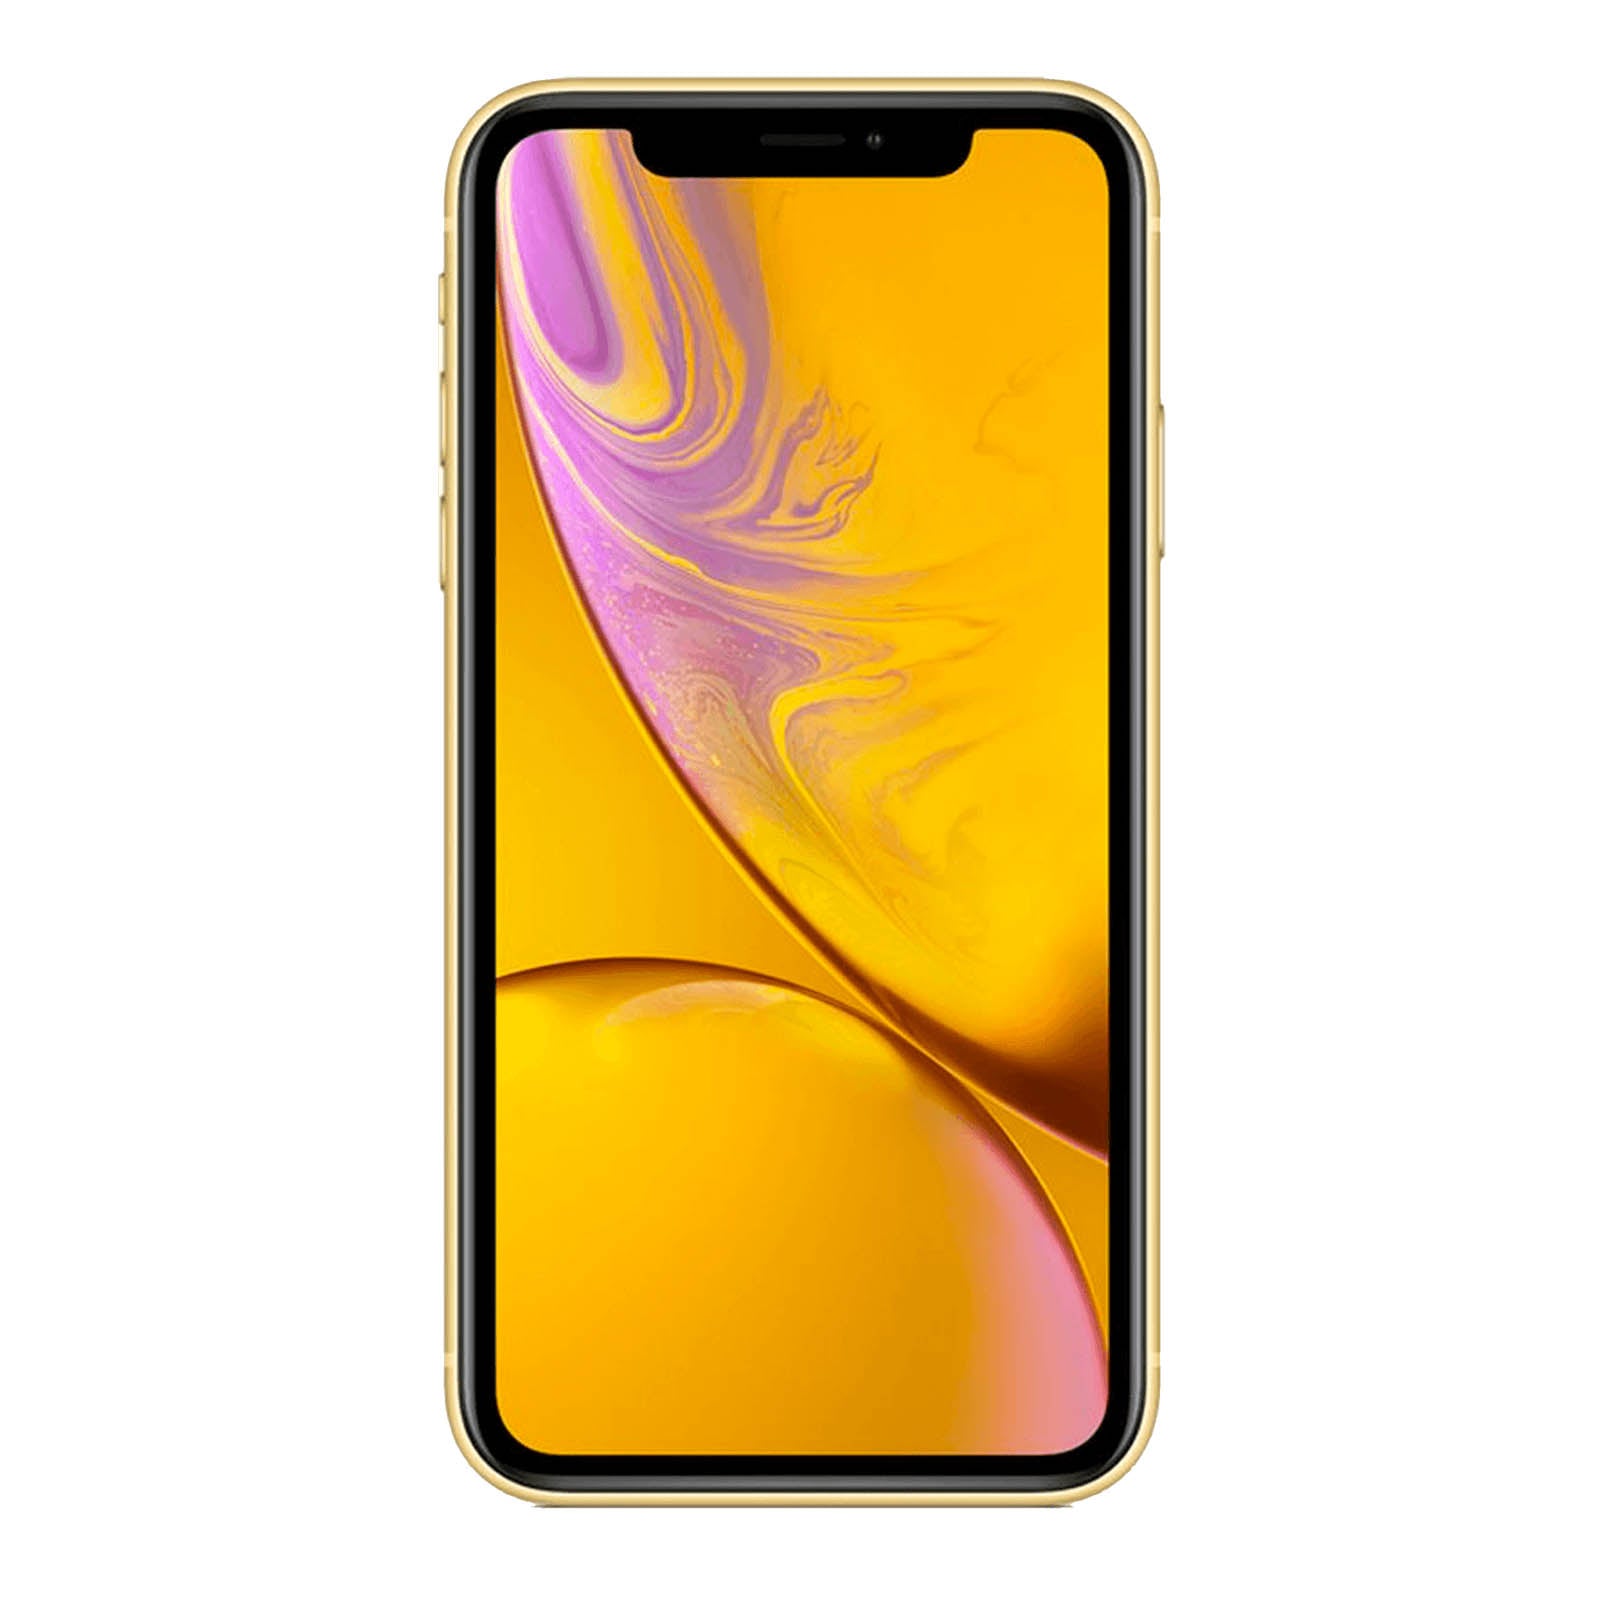 Apple iPhone XR 128GB Yellow Good - T-Mobile